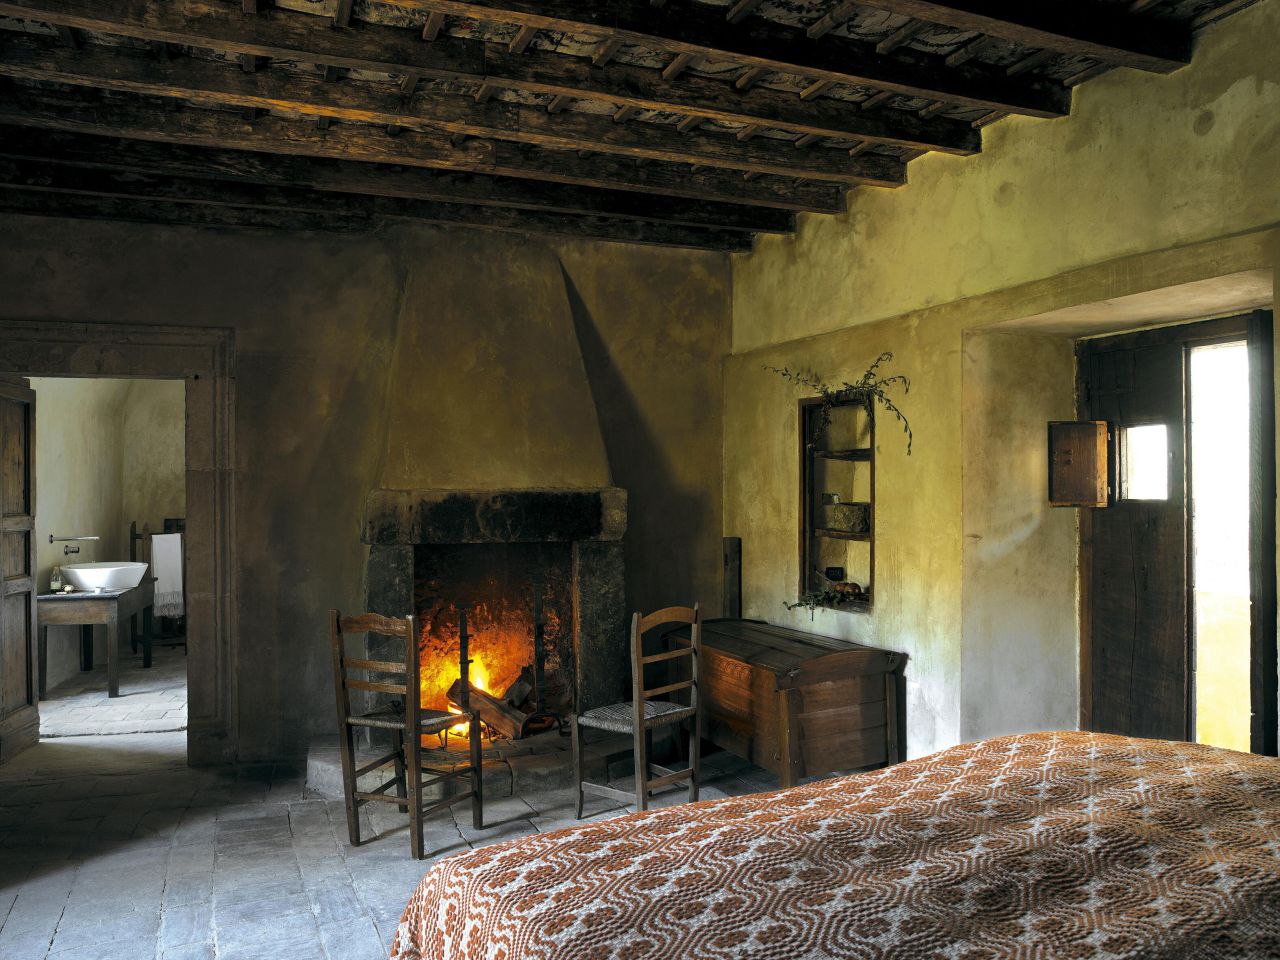 The Sextantio hotel's 29 rooms are restyled wood and stone dwellings.